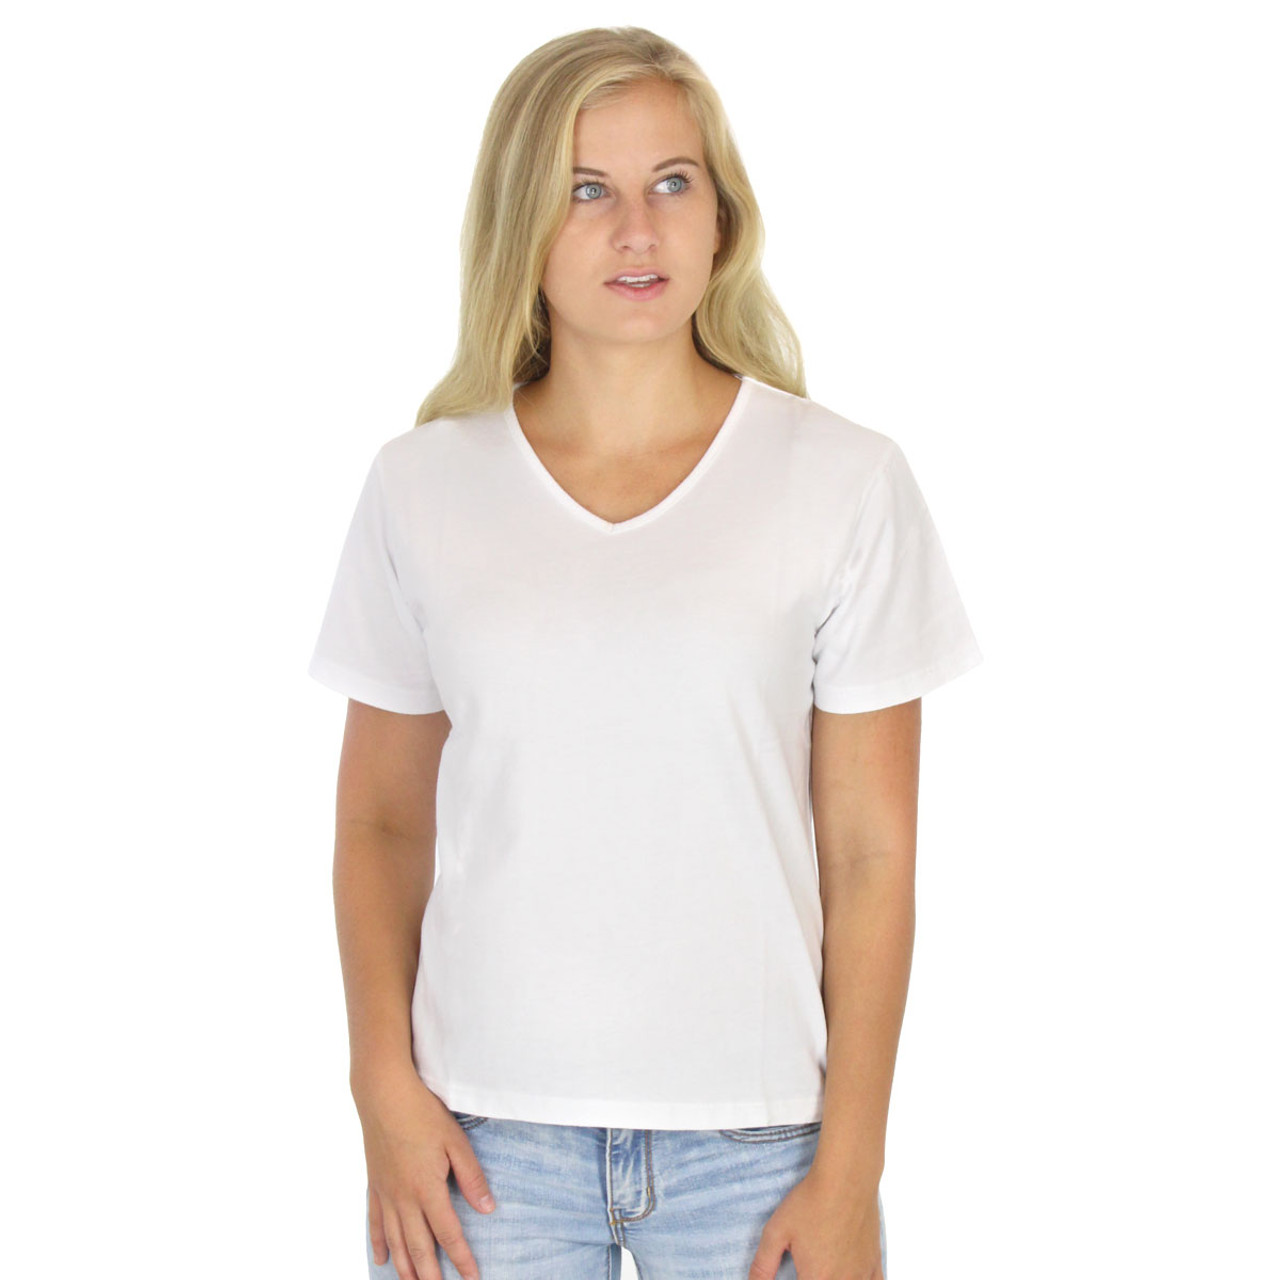 Women's Cotton Shirts | Short Sleeve Tees | ICanToo Cotton Clothing ...